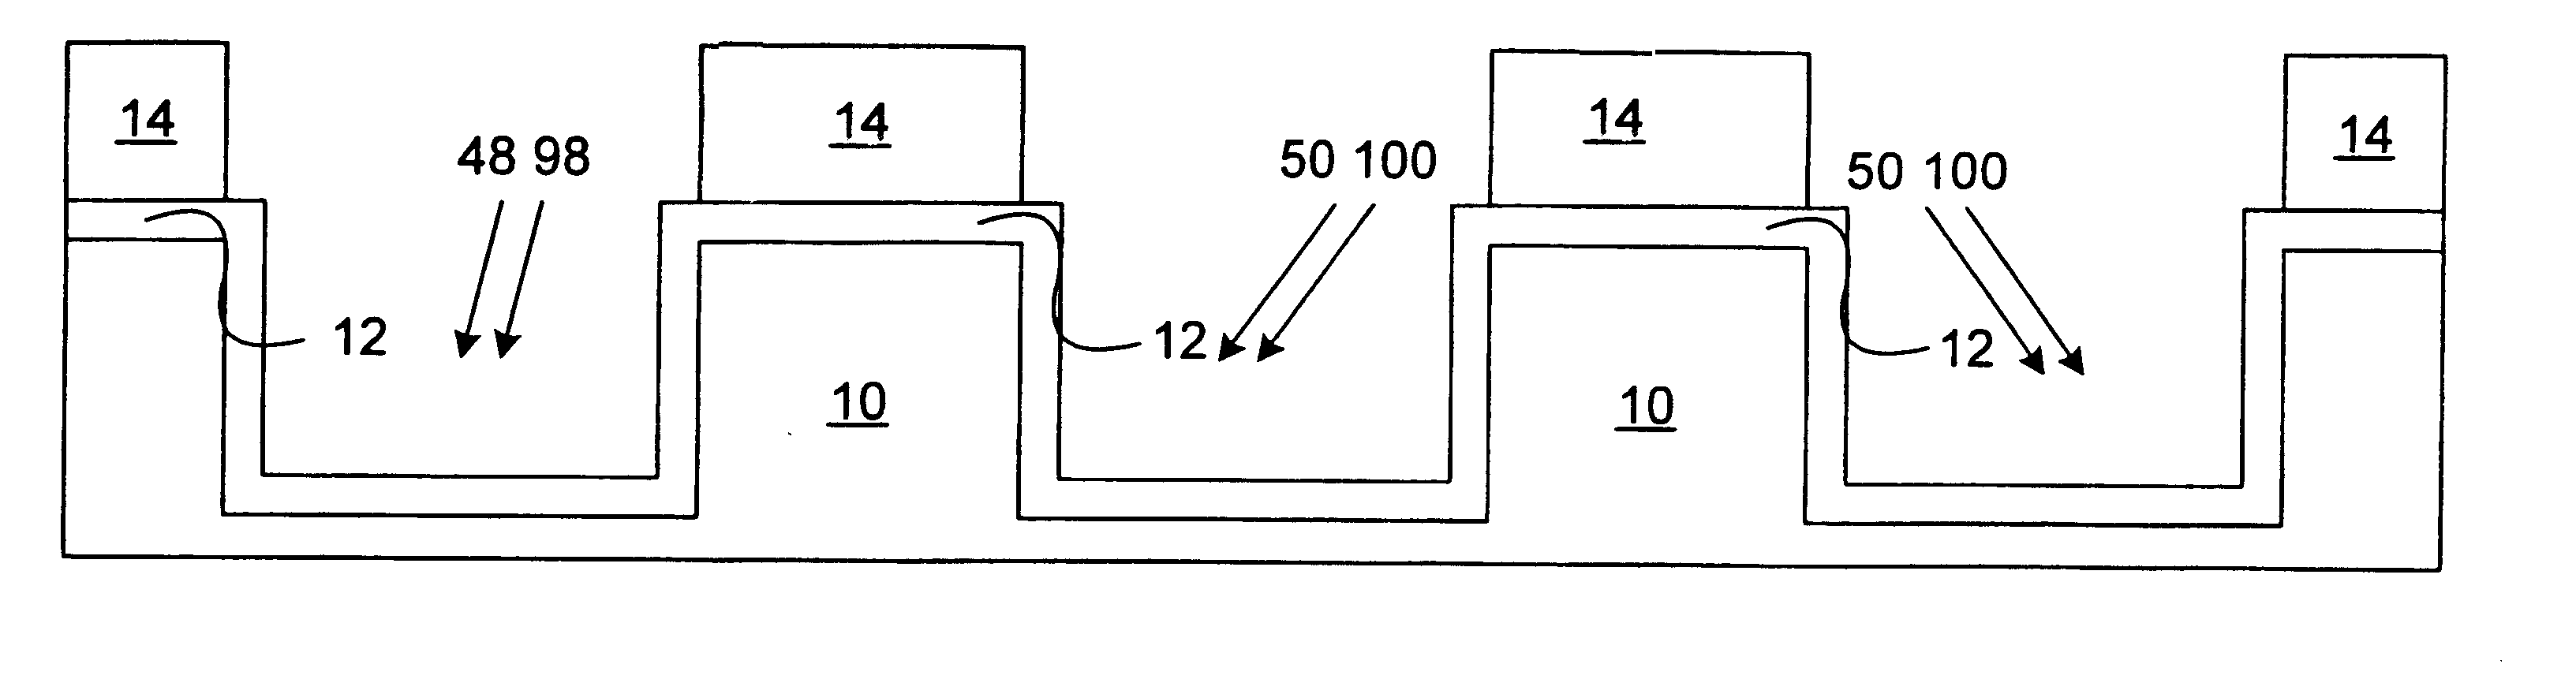 Radiation hardening method for shallow trench isolation in CMOS